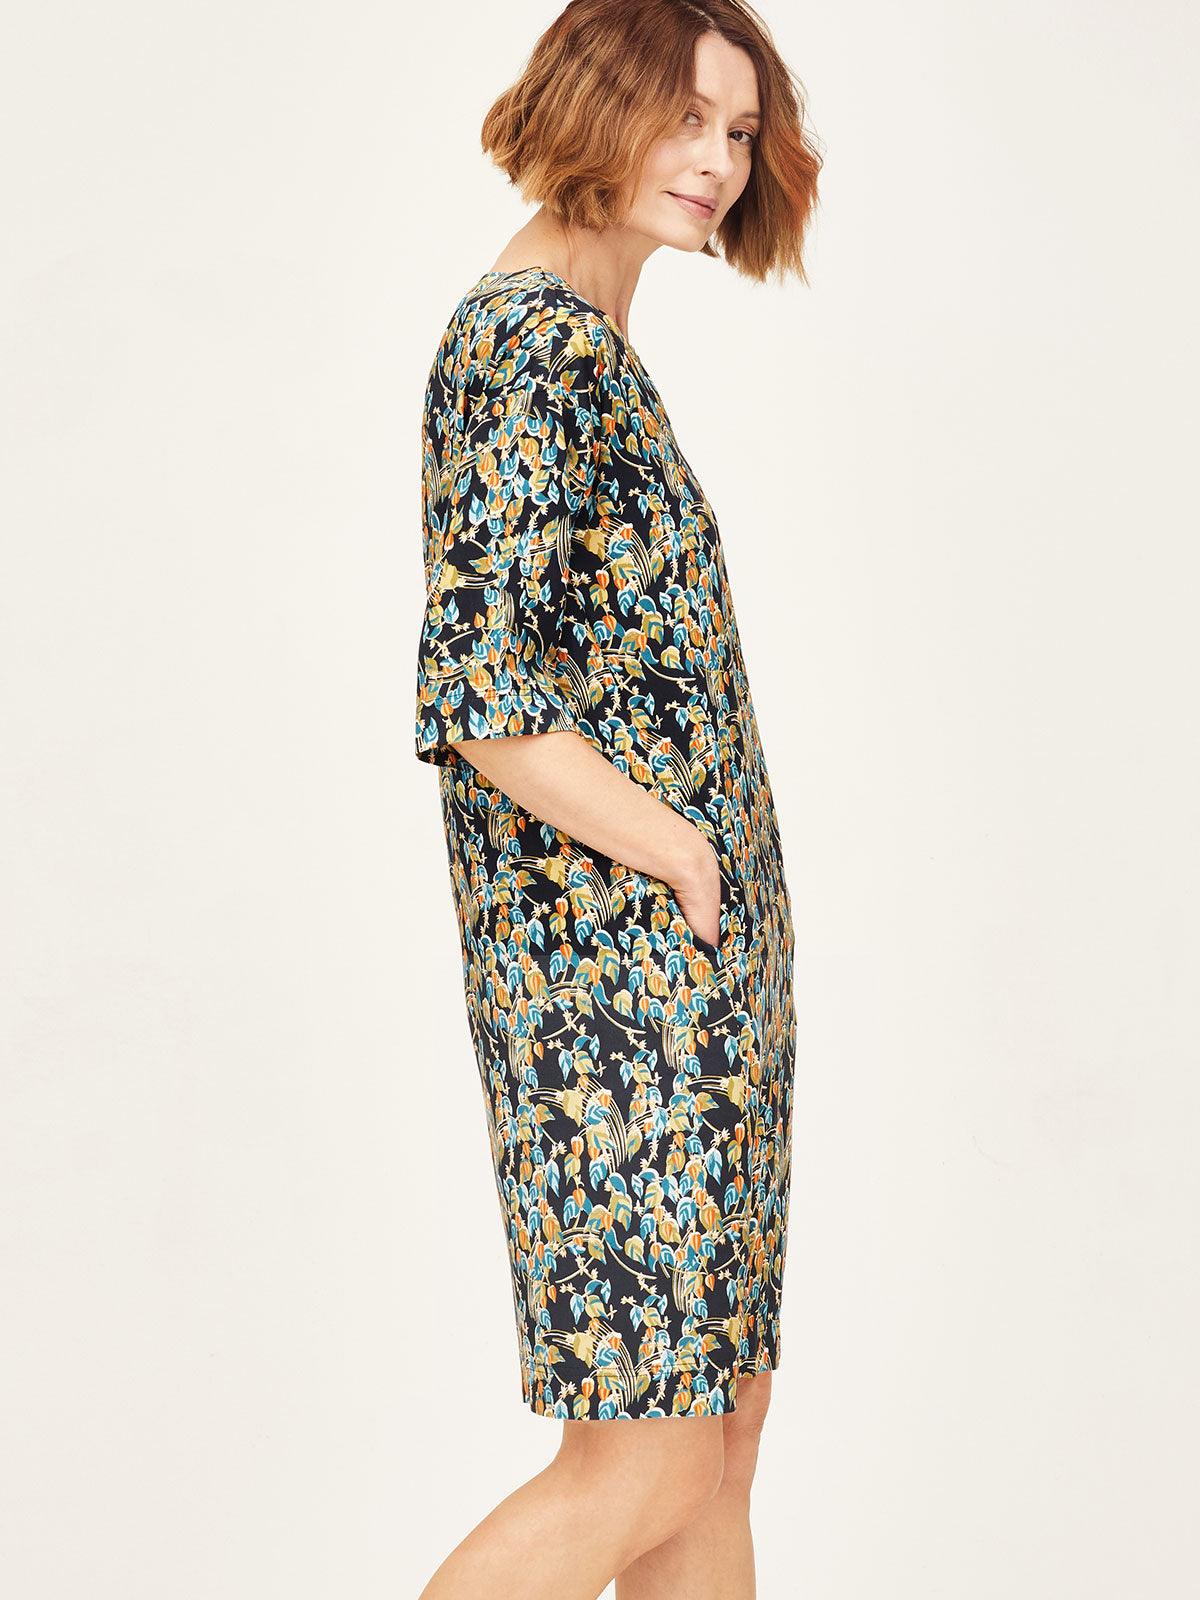 Barns Modal Floral Shift Dress - Thought Clothing UK